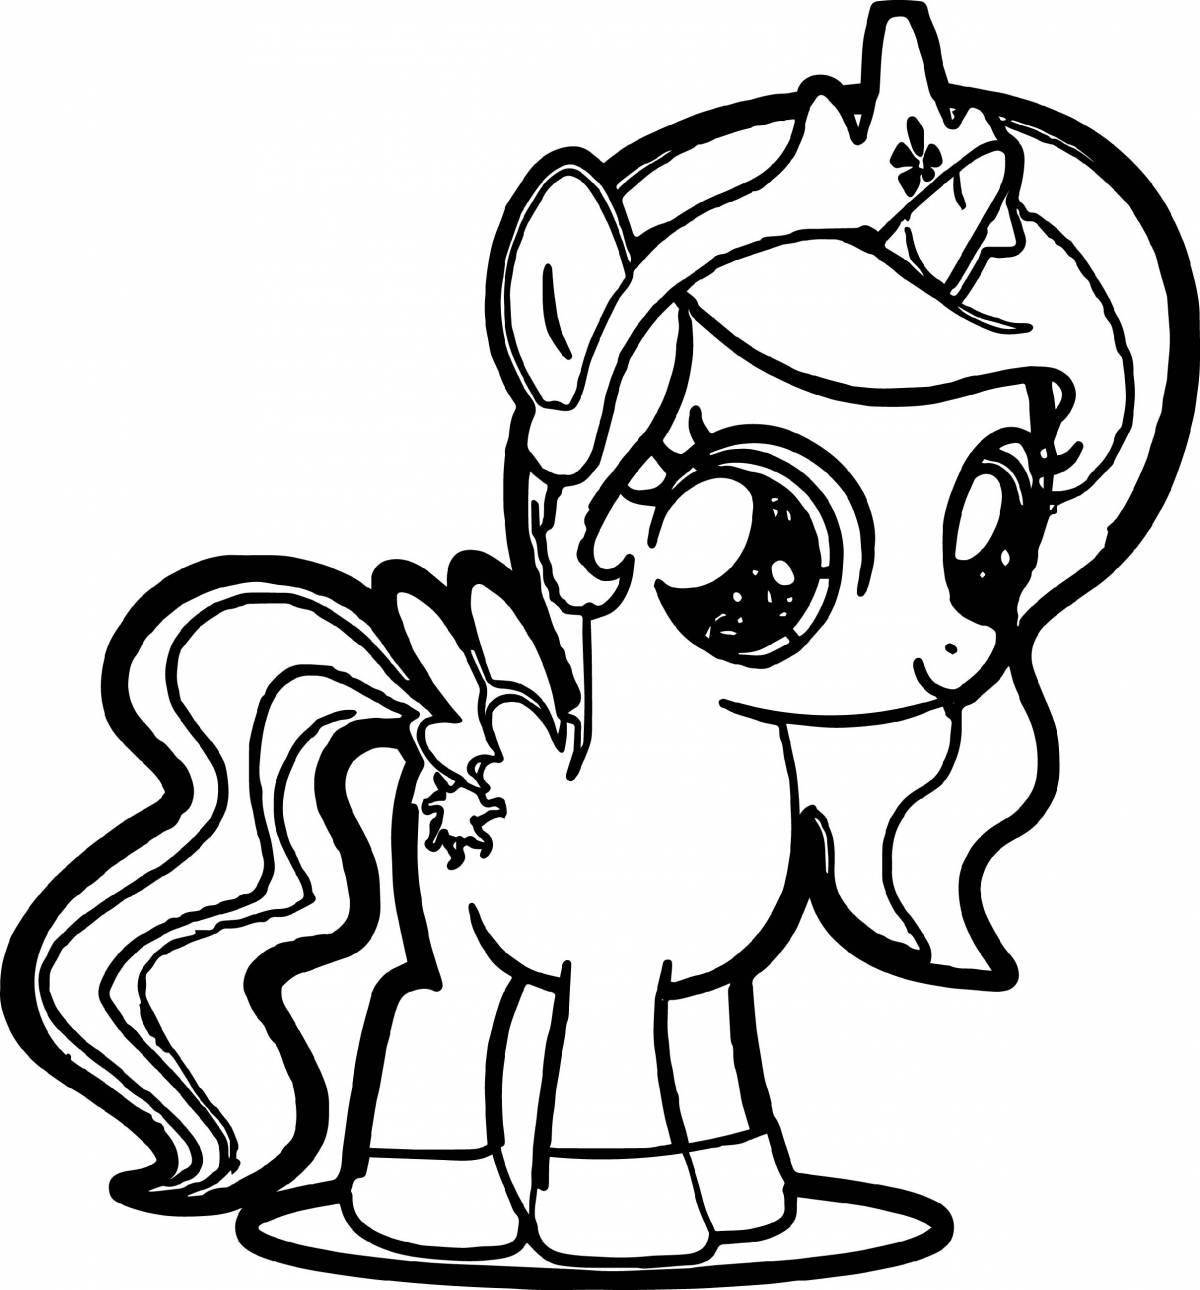 Bright pony coloring book